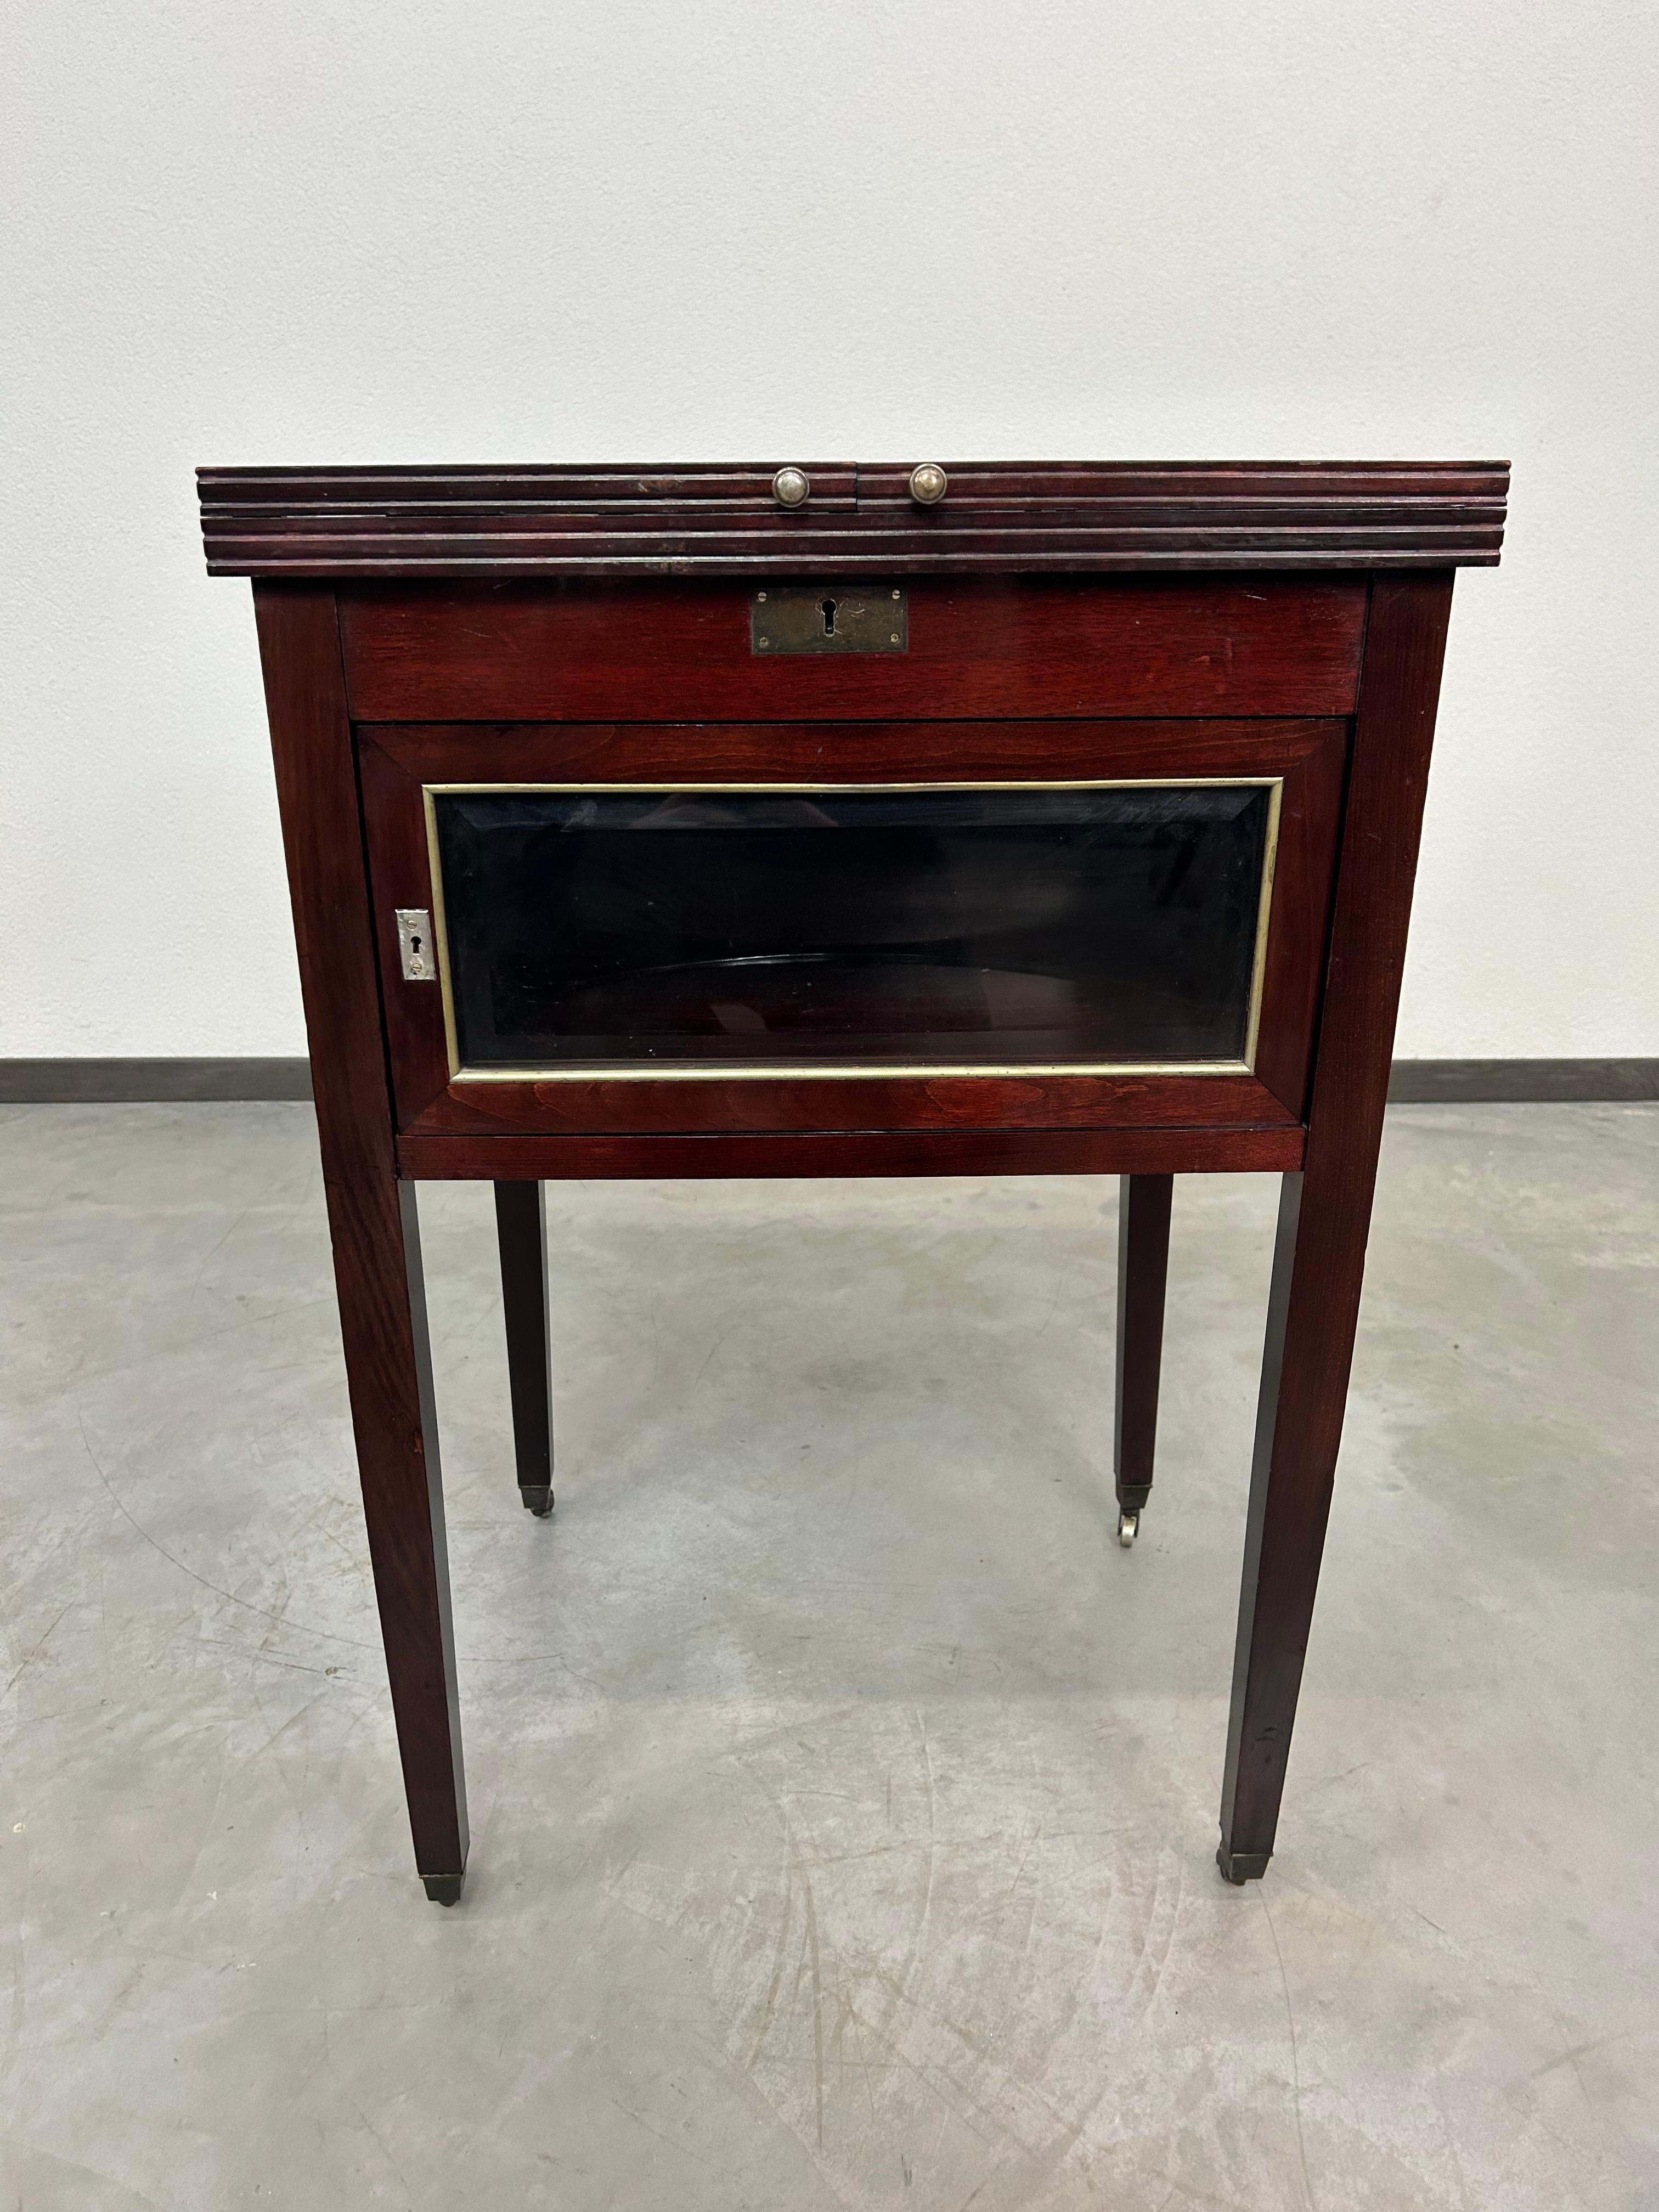 Jugendstil mahogany bar cabinet by Portois & Fix in very nice original condition with signs of use.